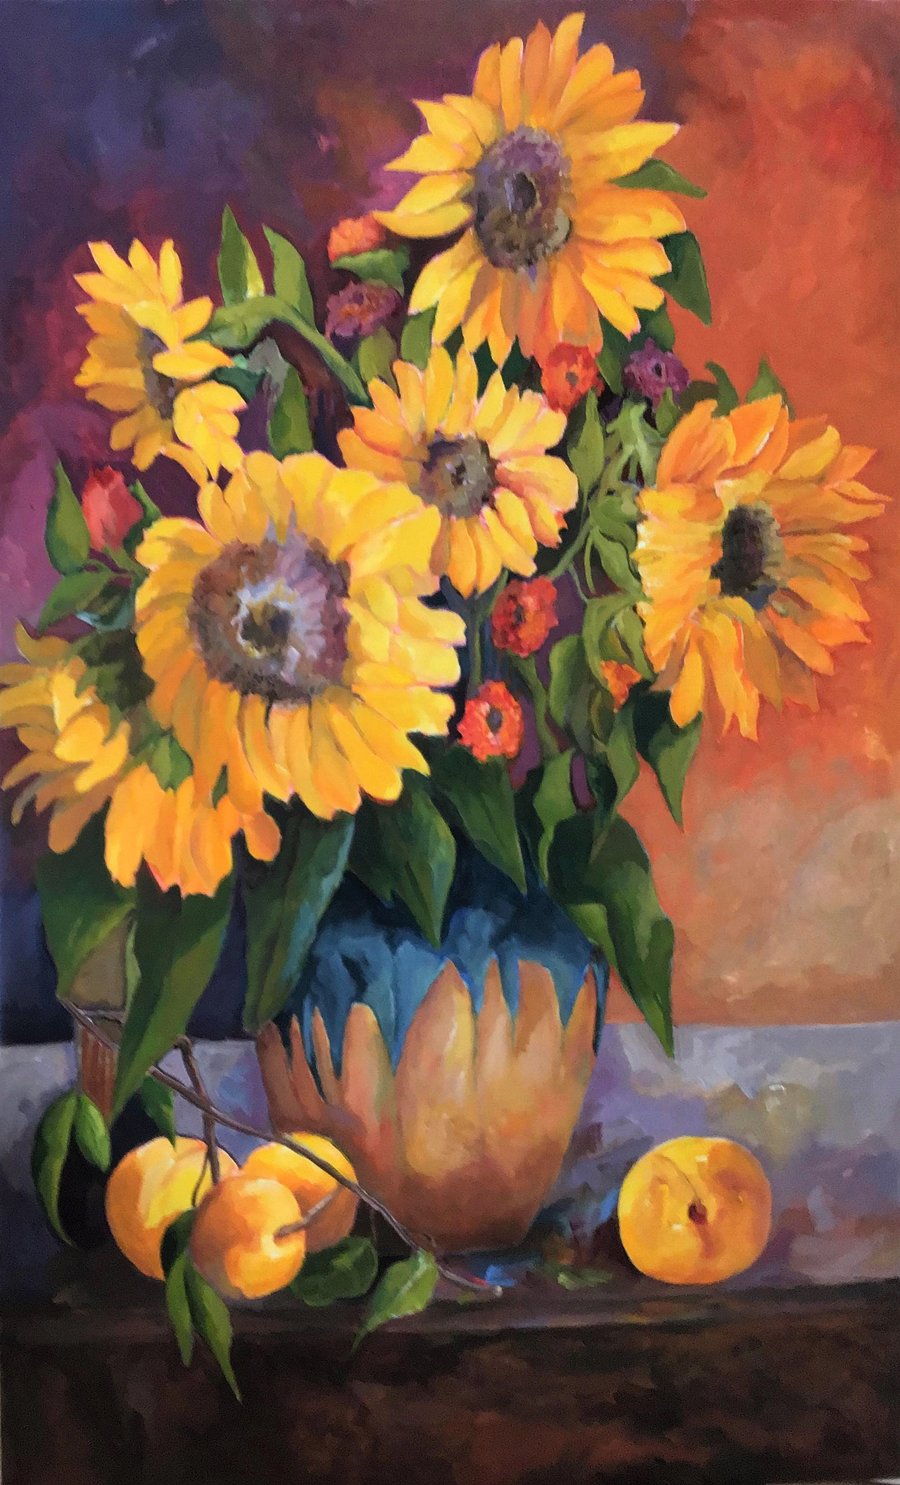 Image of Sunflowers and Peaches by Yvette Galliher